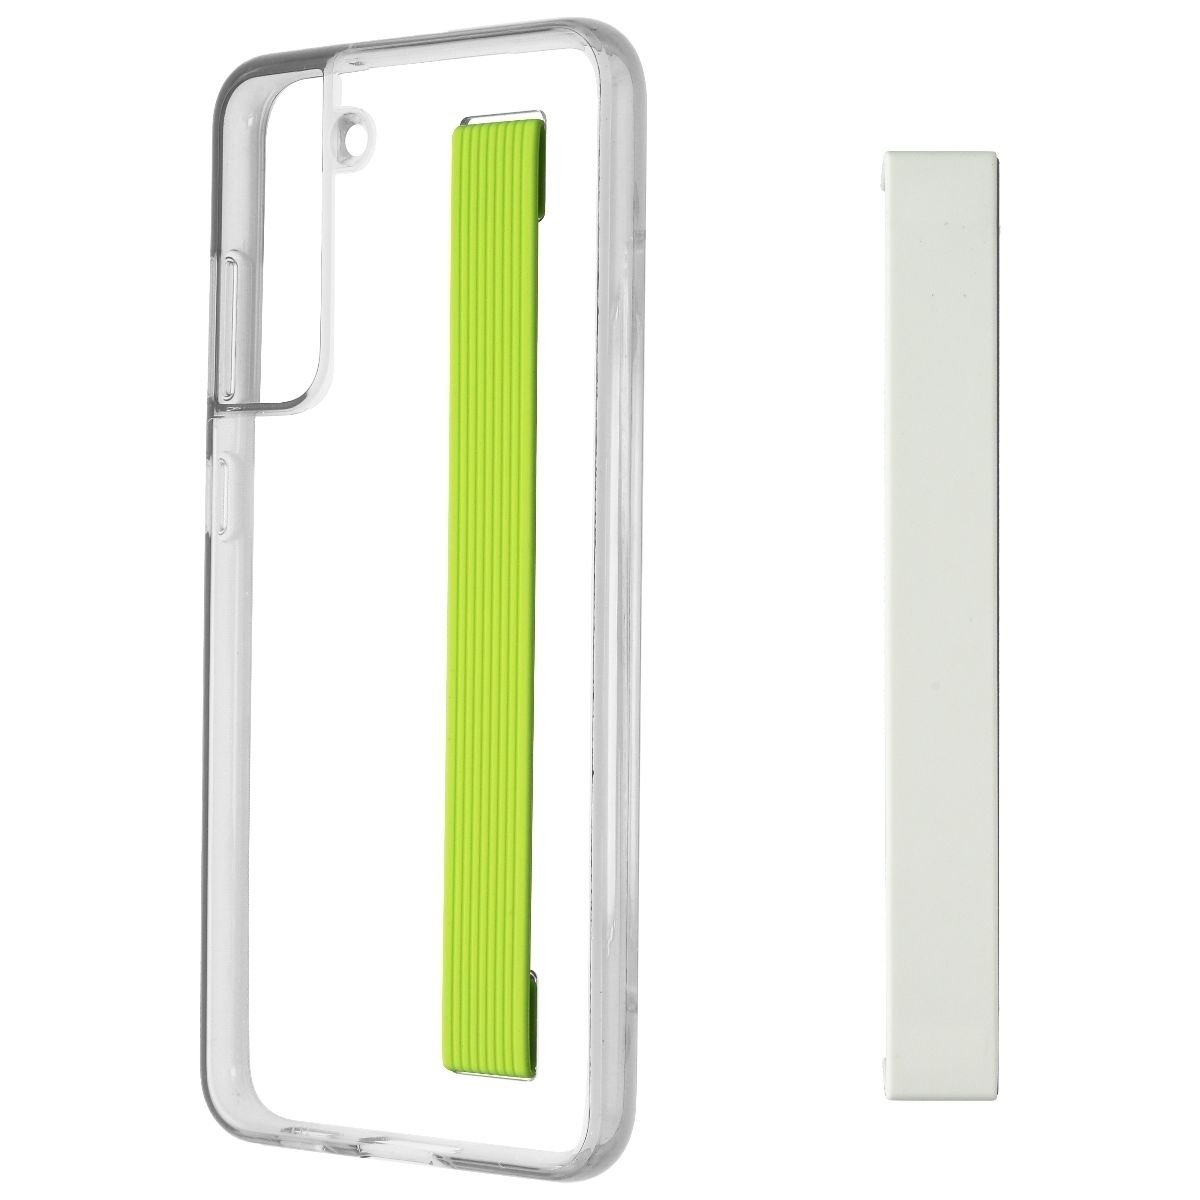 UPC 887276576053 product image for Samsung Slim Strap Cover Case for Galaxy S21 FE (5G) - Clear/White/Neon Yellow | upcitemdb.com